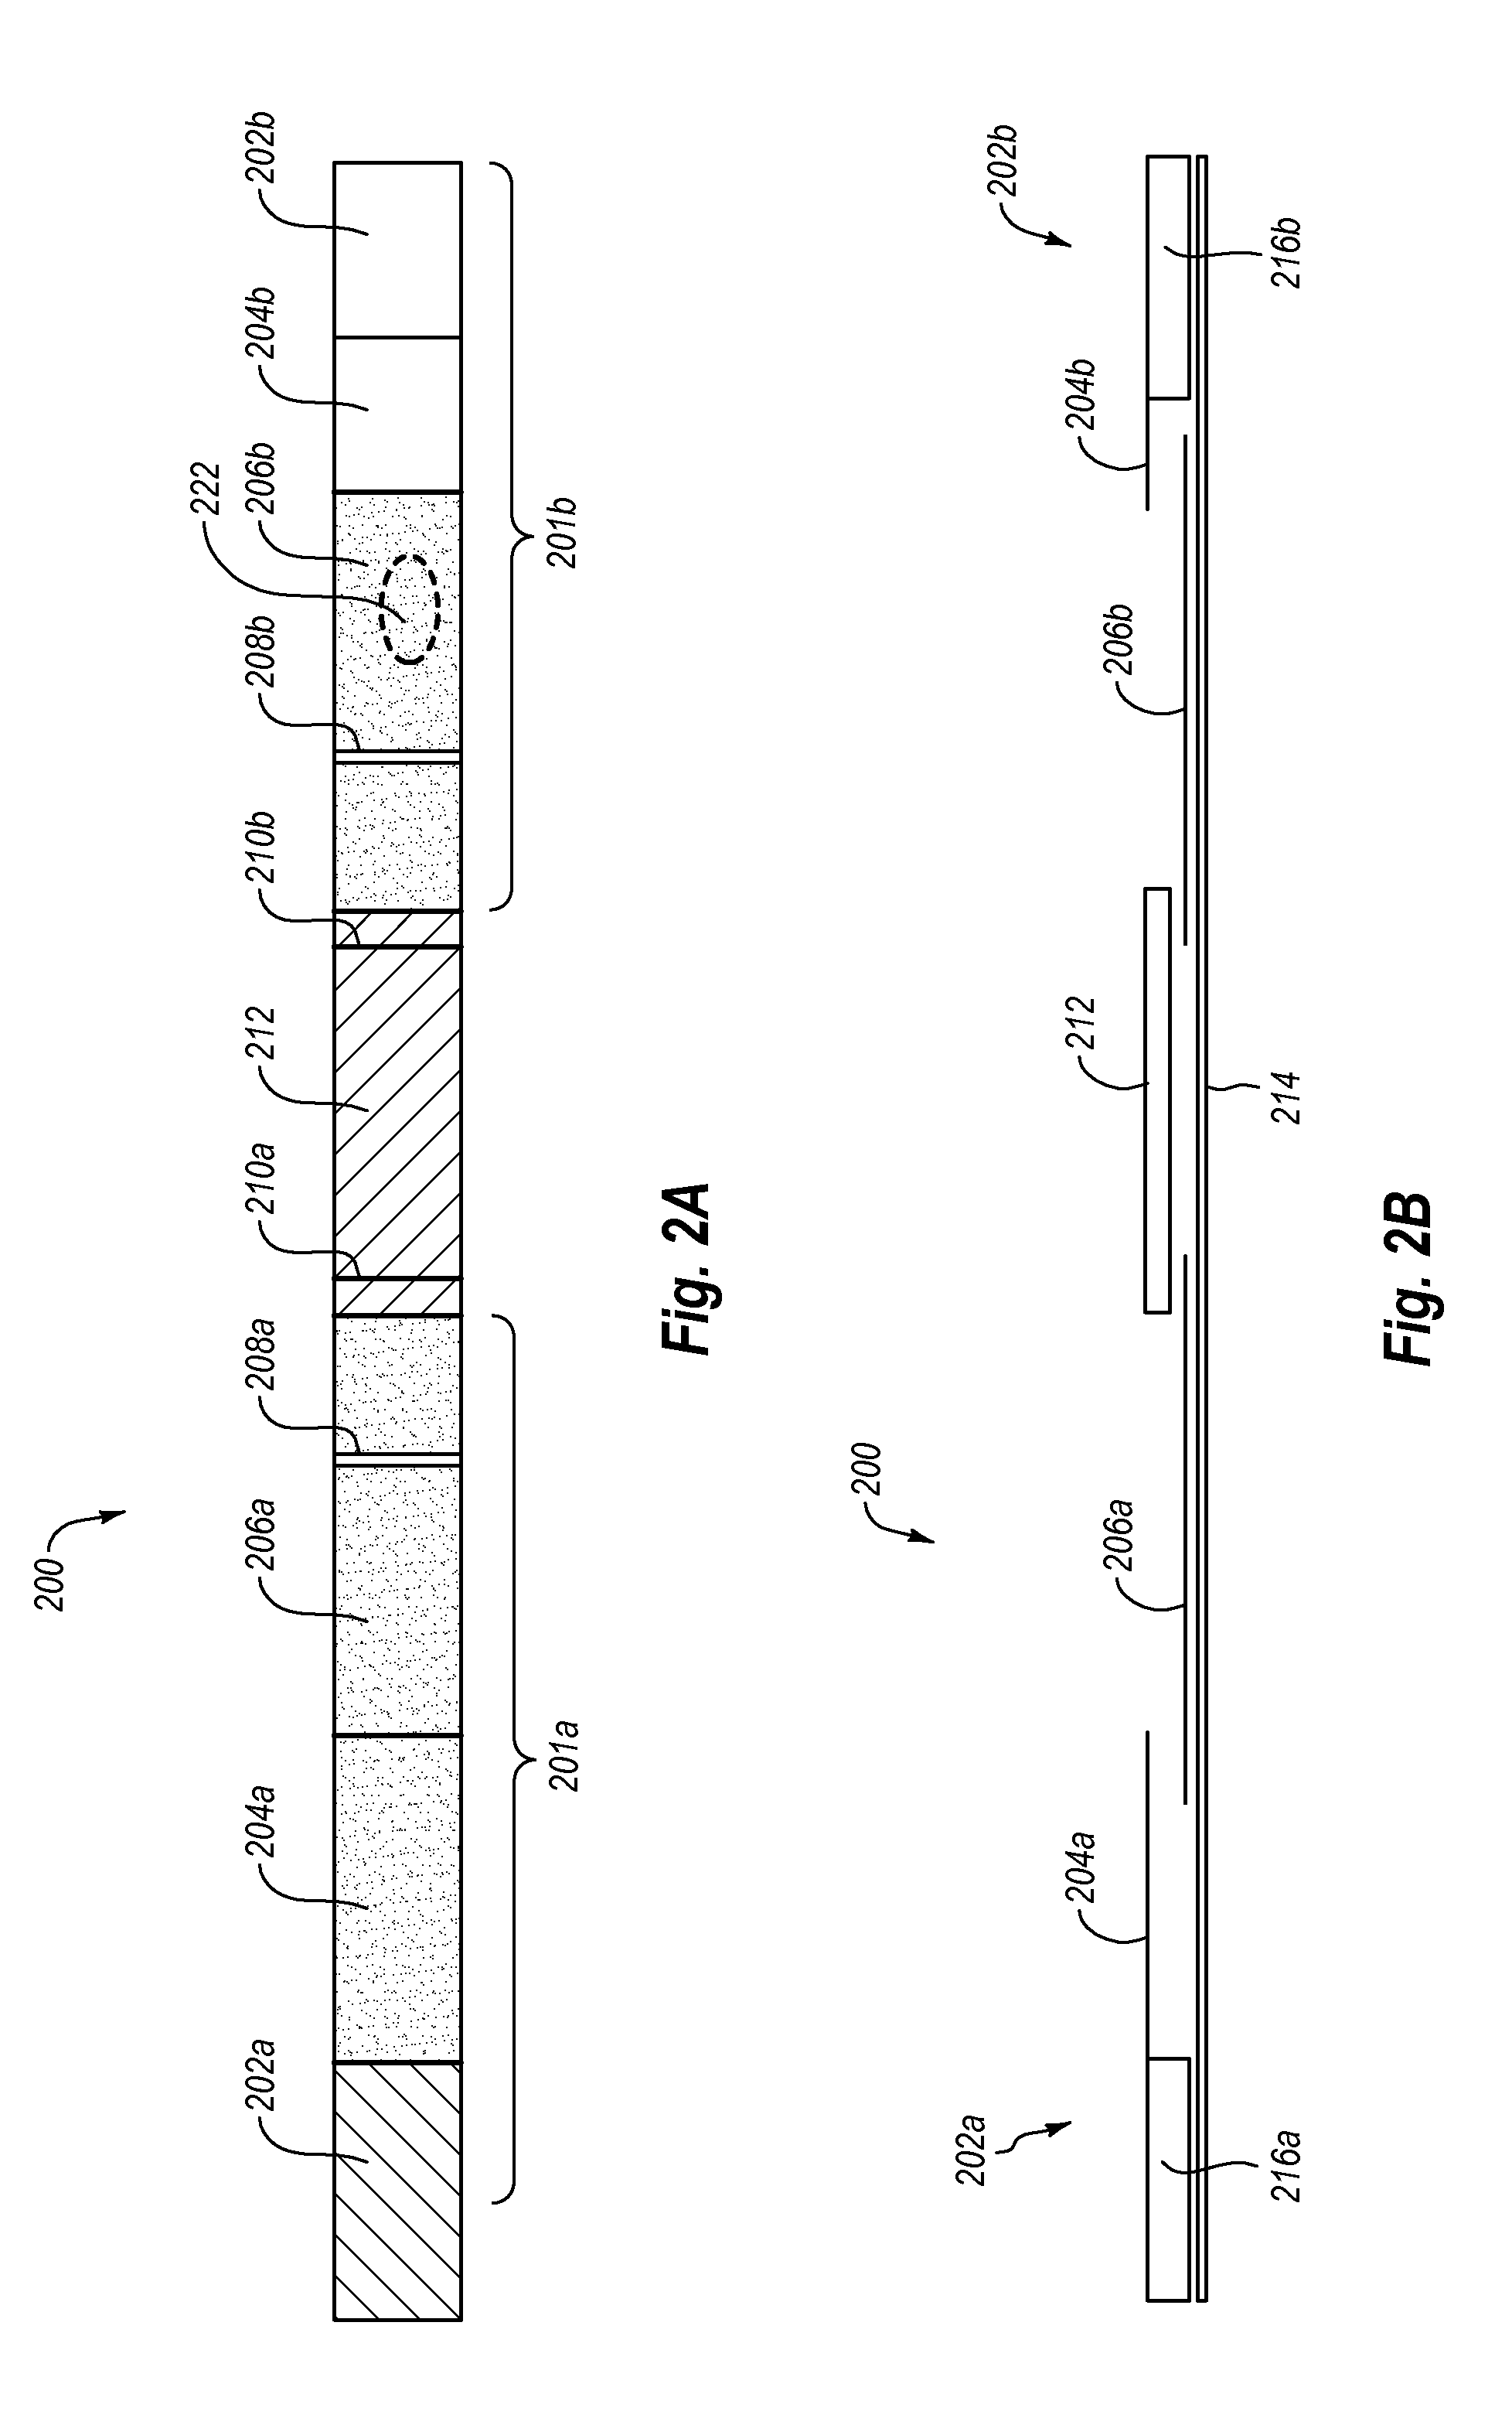 Device for performing a diagnostic test and methods for use thereof